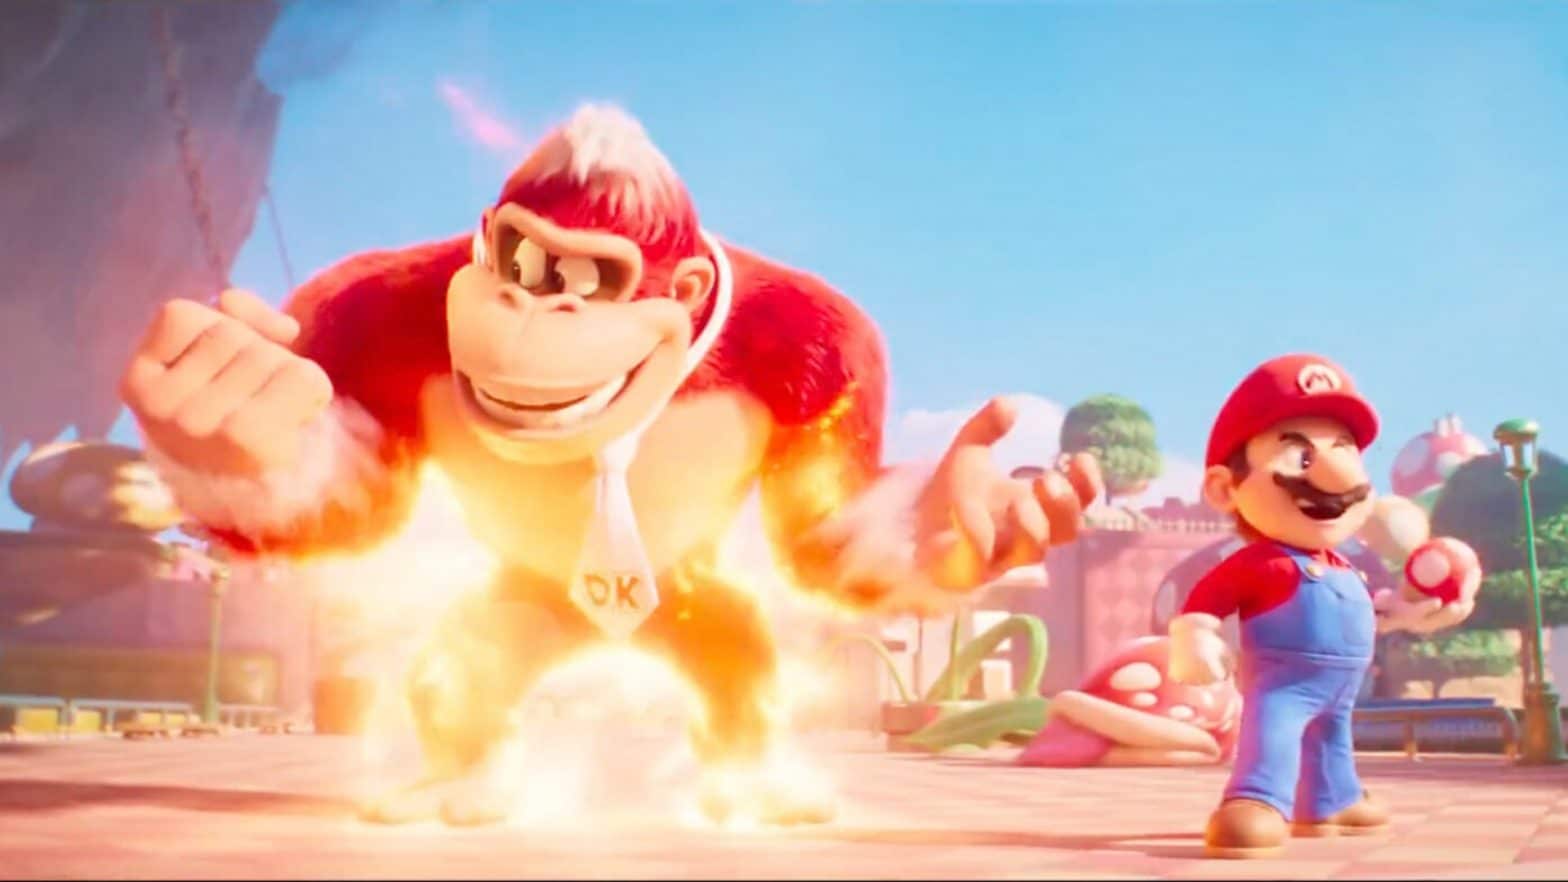 A still from The Super Mario Bros. Movie featuring Mario and Donkey Kong